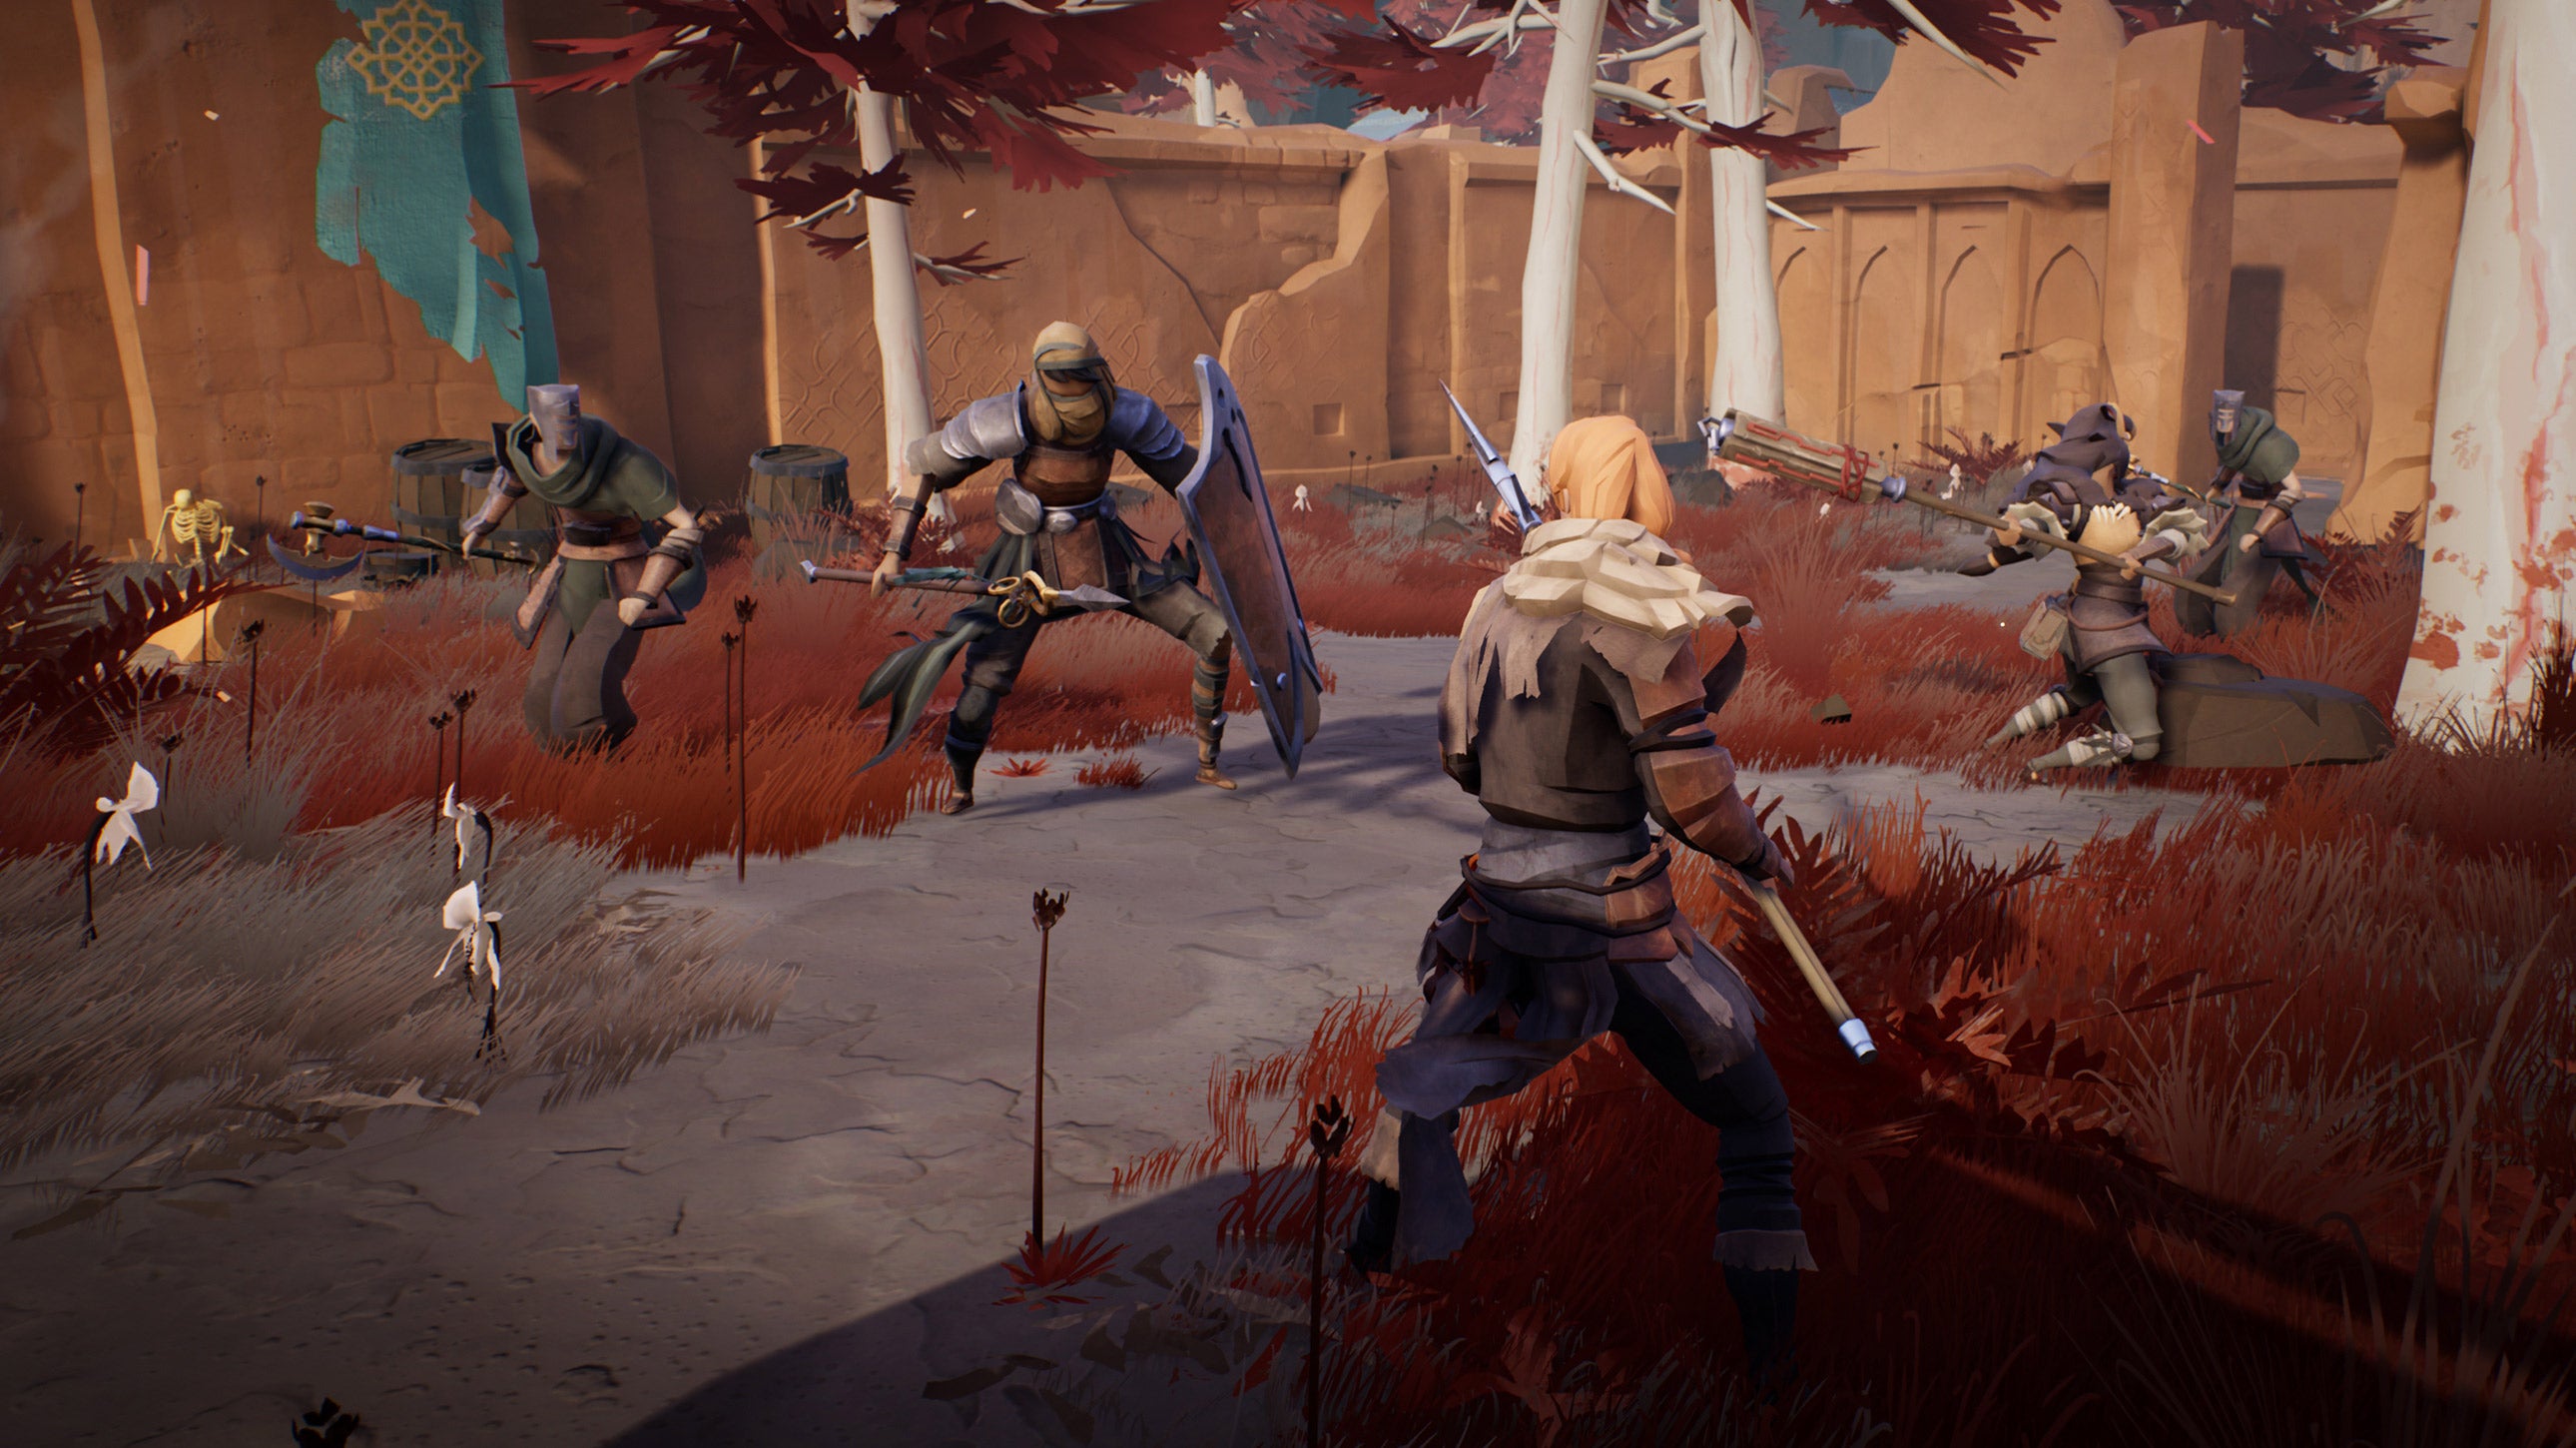 Image for Souls-like RPG Ashen gets stealth release on Xbox One and Epic Games Store